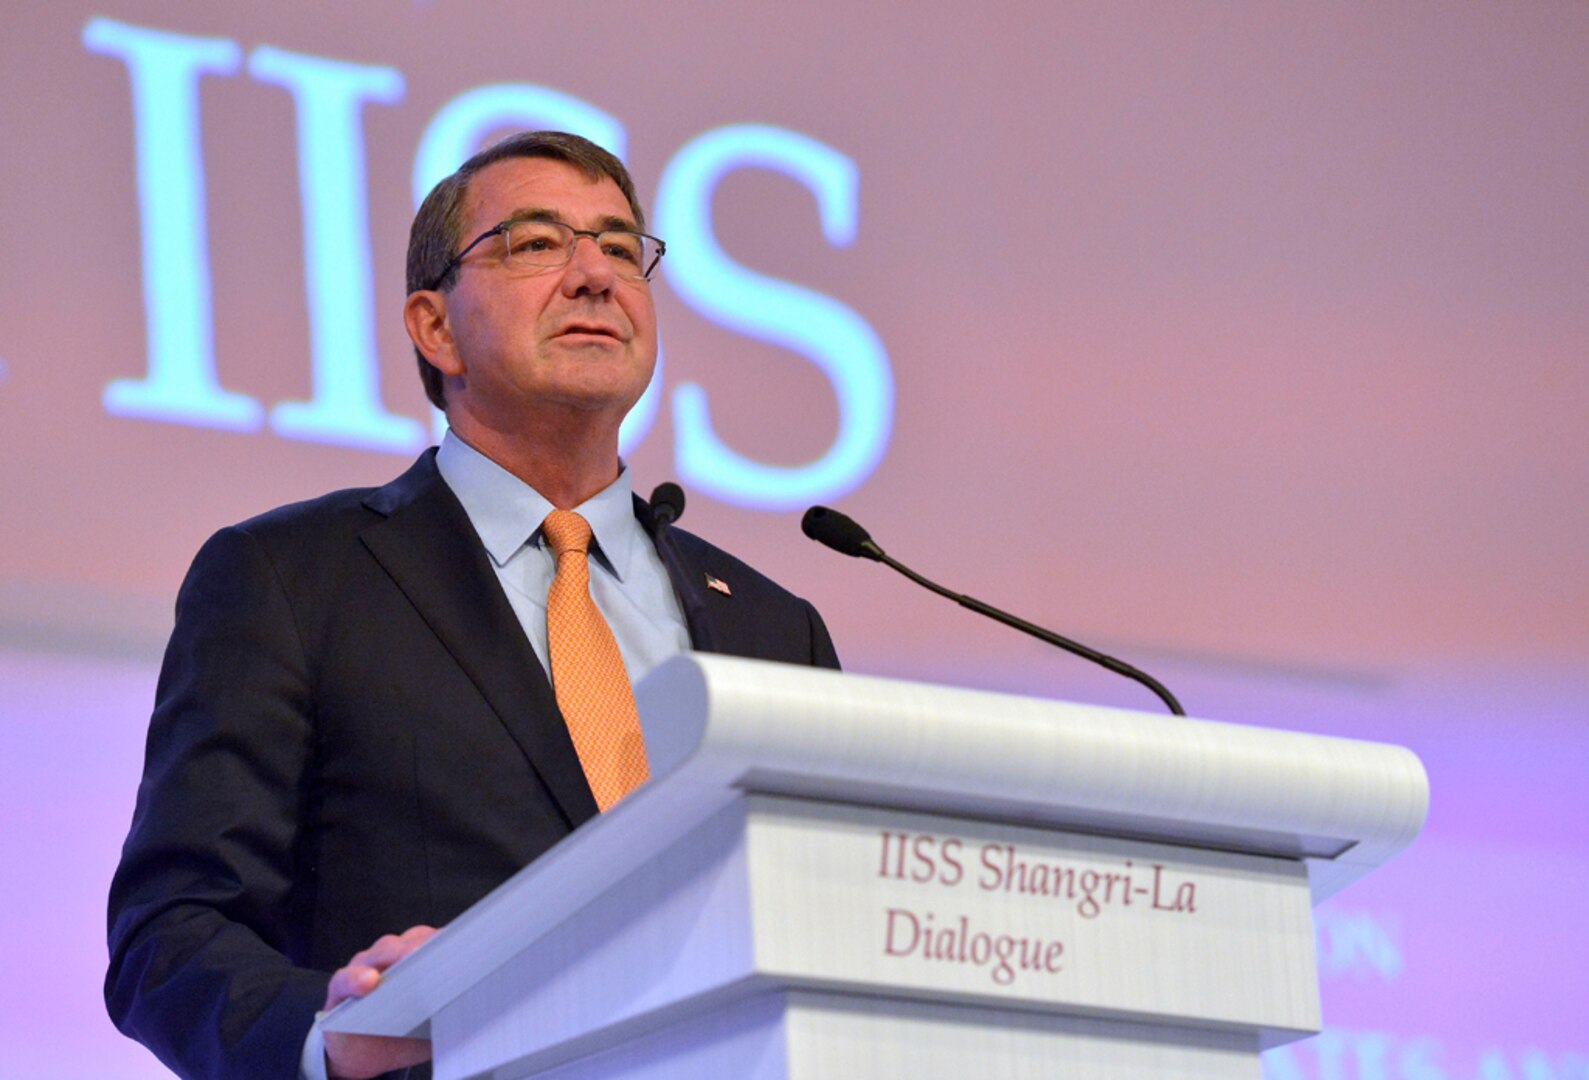 In this photo, Secretary of Defense Ash Carter delivers the keynote address to kickoff the Shangri-La Dialogue in Singapore, May 30, 2015. Carter spoke of strengthening relations between Asia-Pacific nations and countered provocative land reclamation efforts by China. 